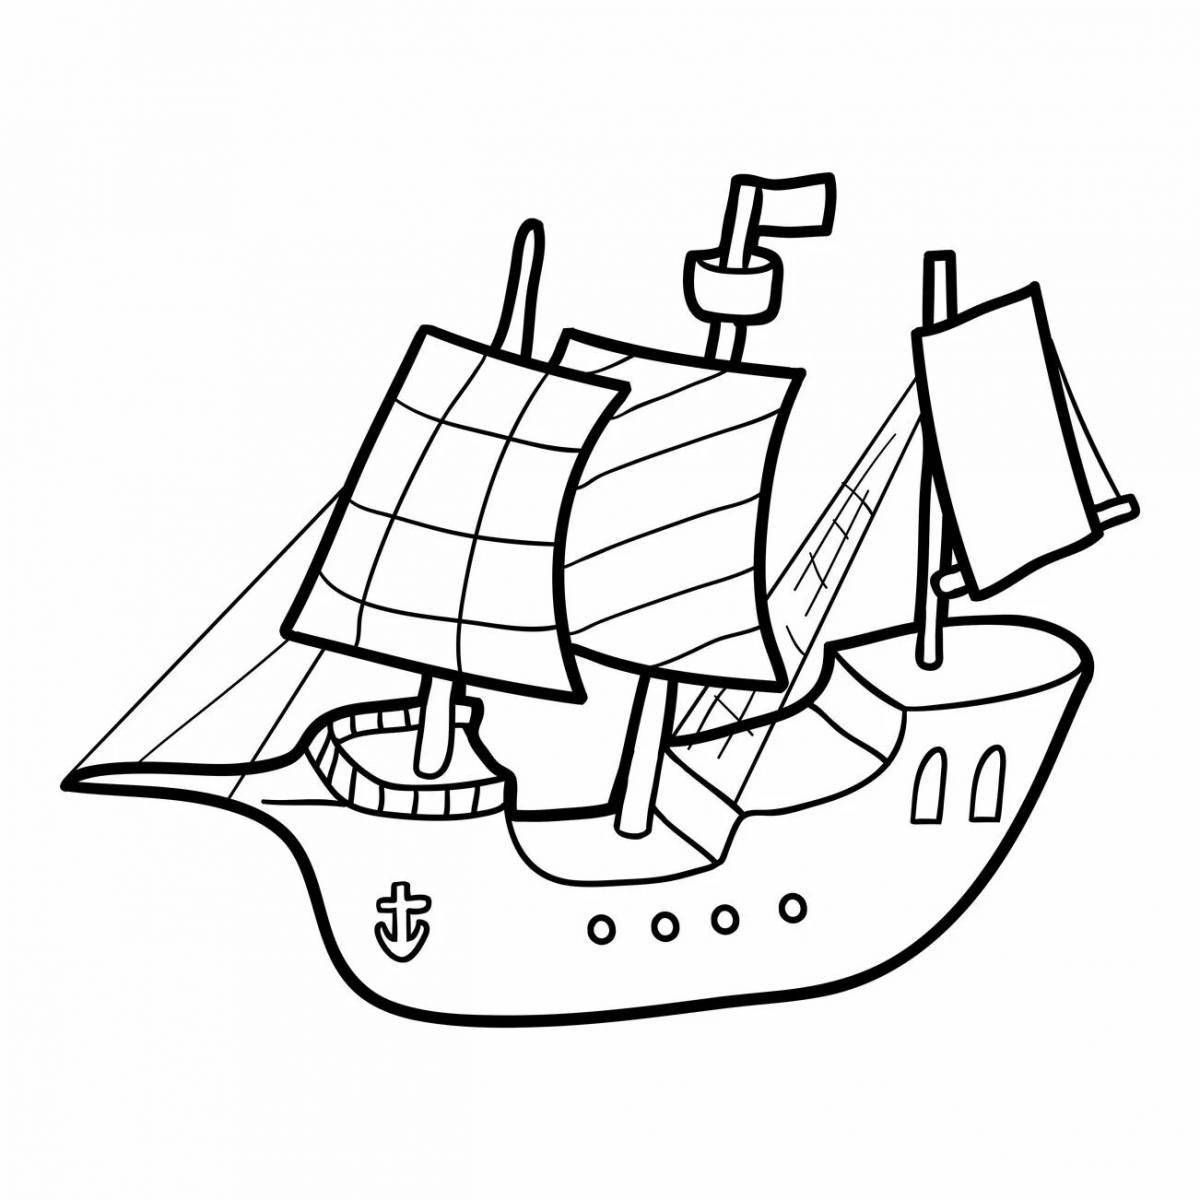 Steamboat coloring book for 5-6 year olds